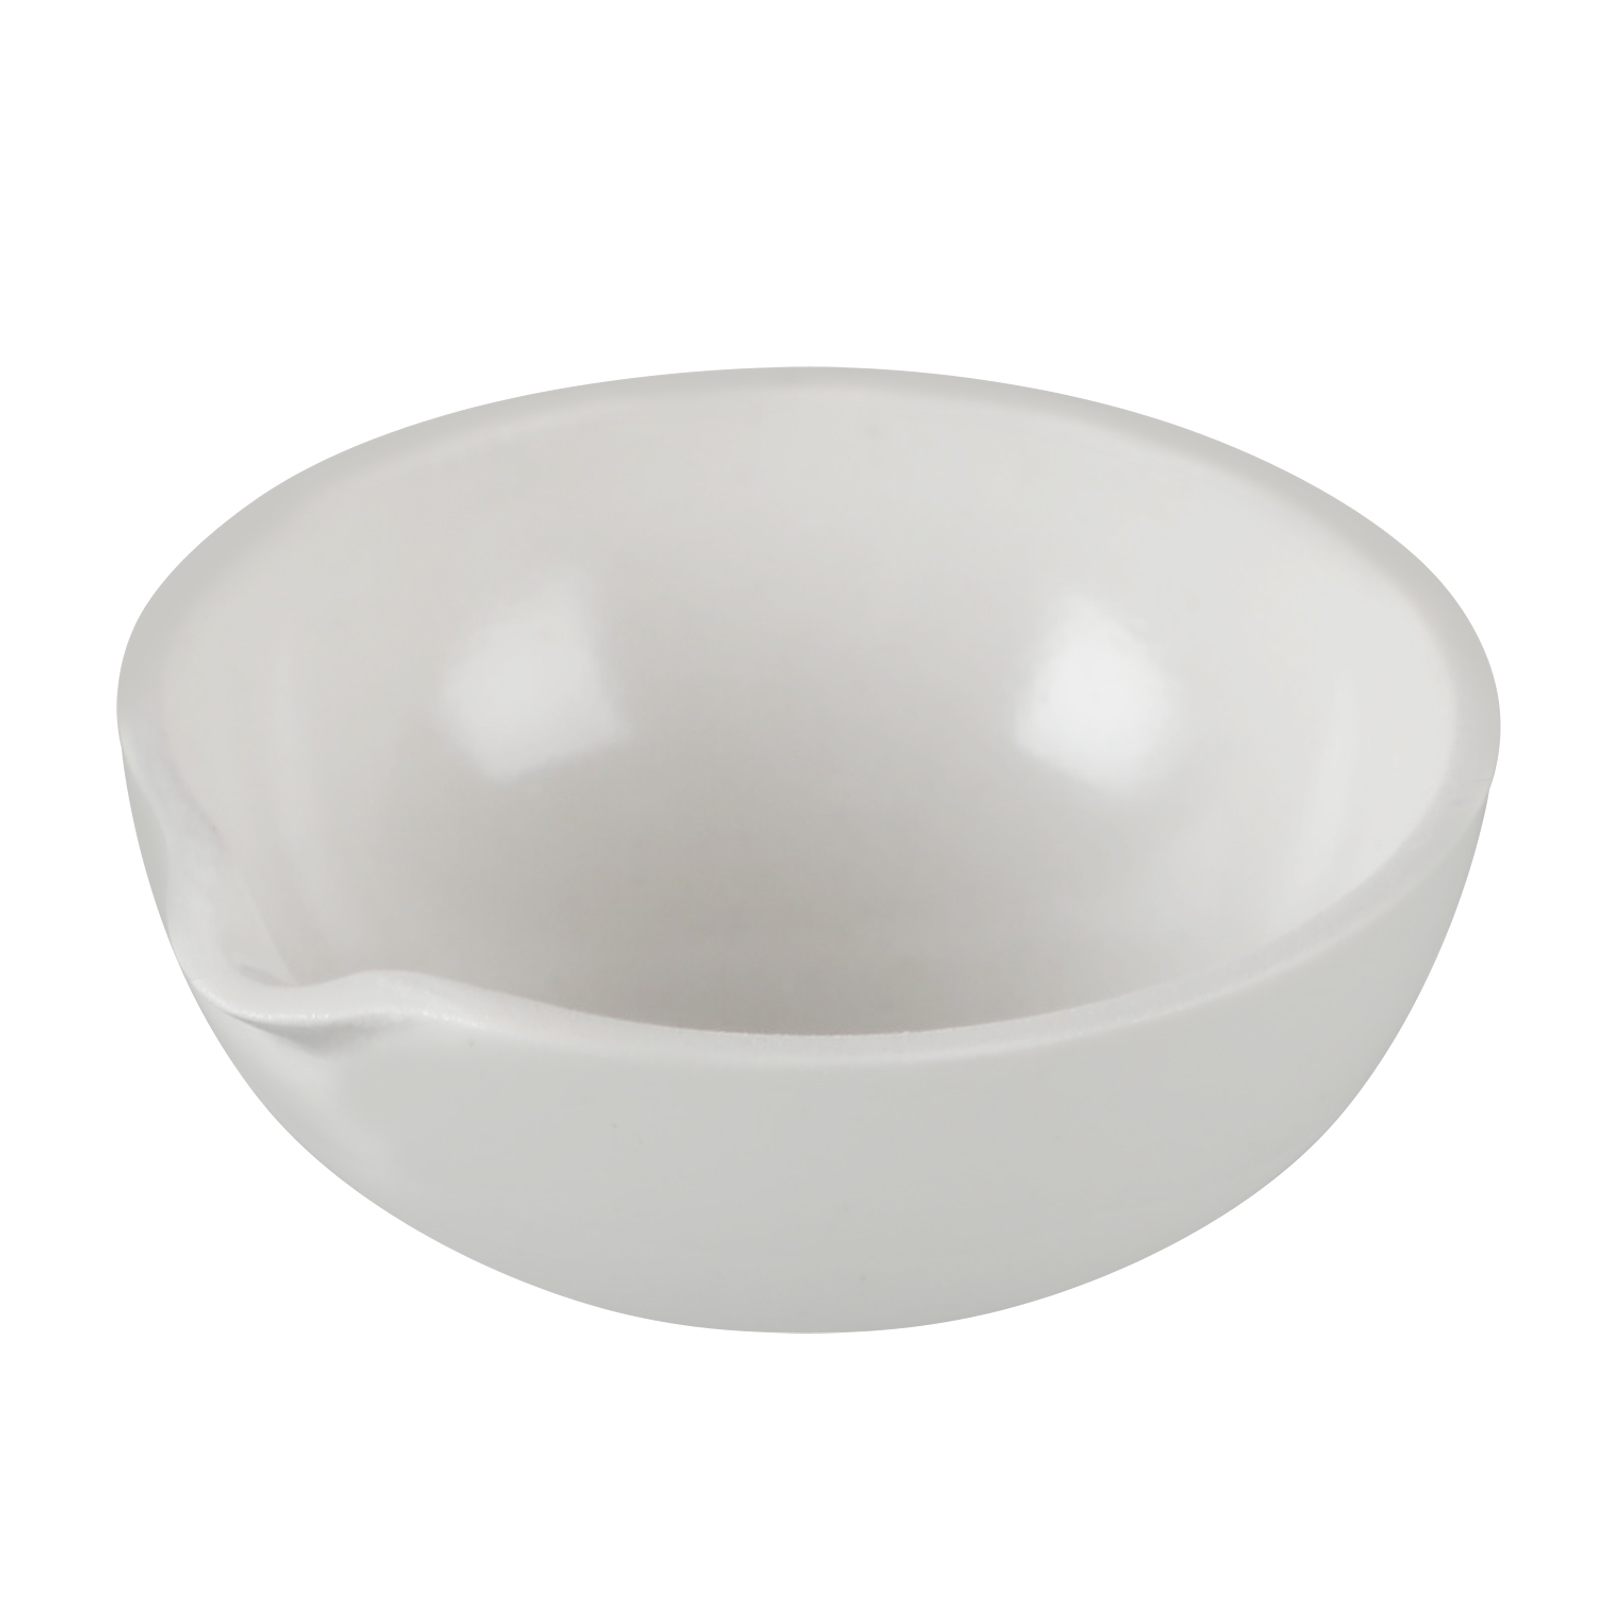 ADAMAS BETA Laboratory Ceramic Evaporating Dish Diameter 60-300mm 35-3000ml Round Dish with Outlet for Concentration Crystallization Experiment